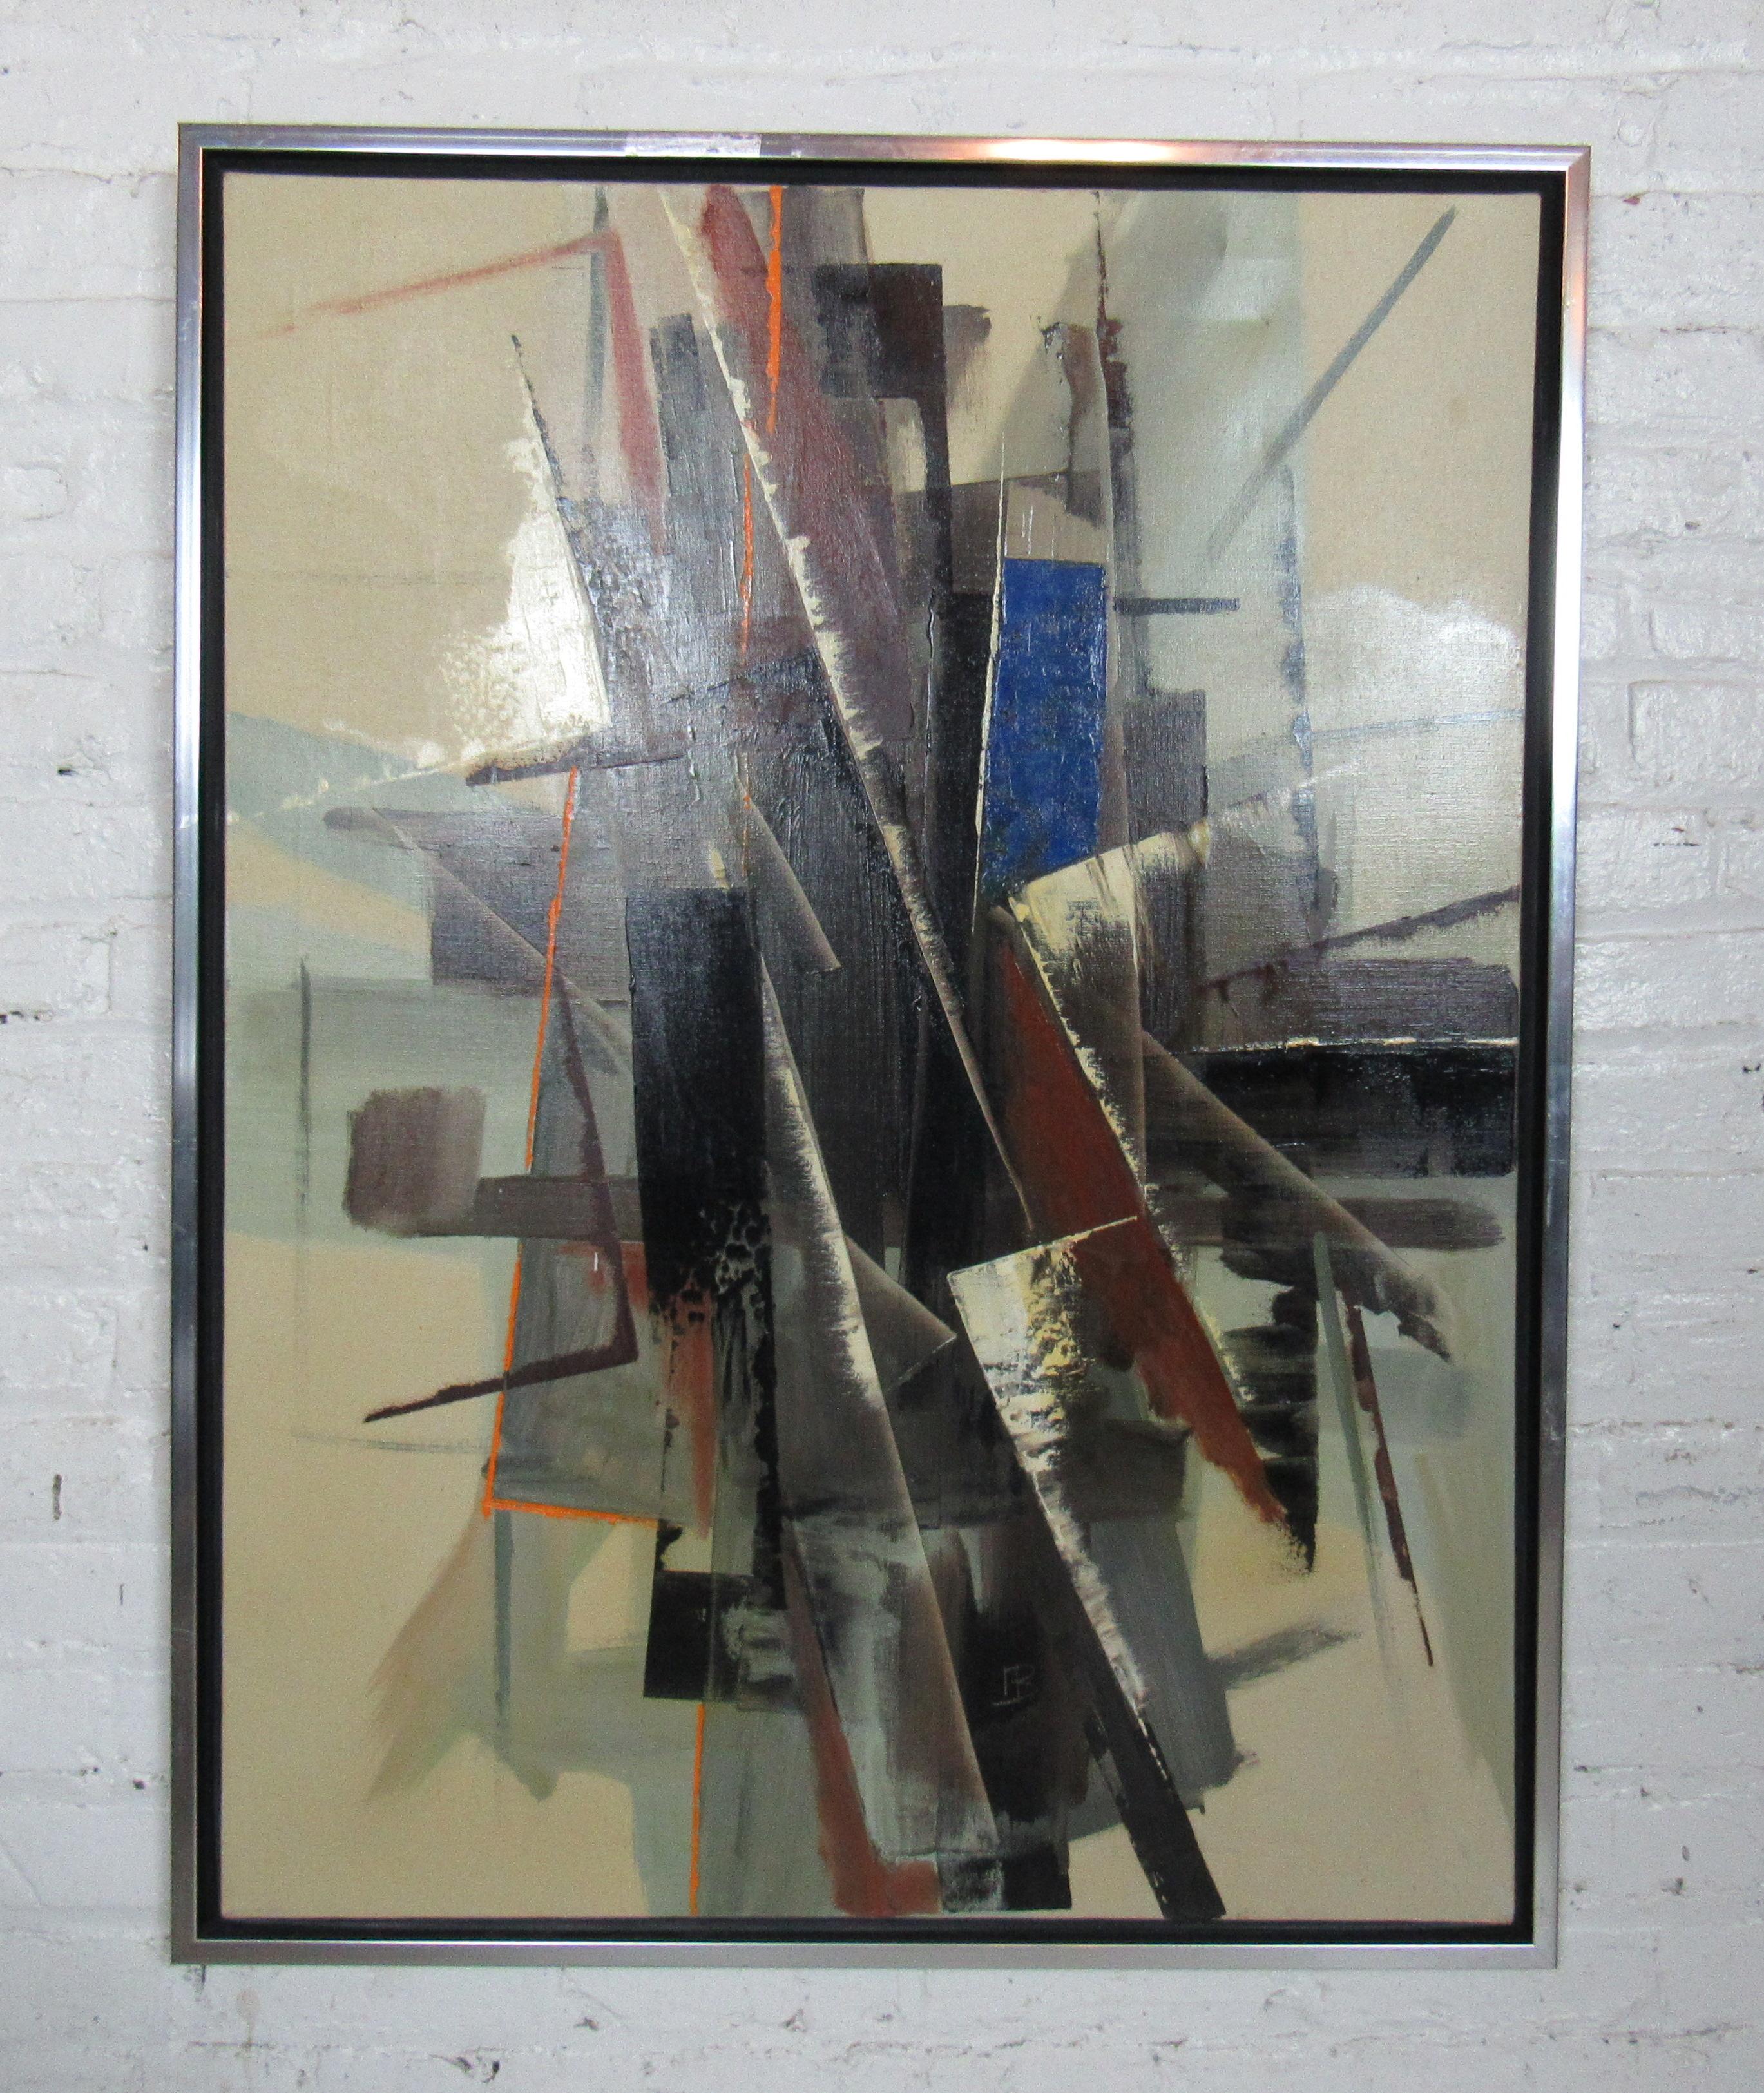 Large abstract painting on canvas featured in a wood frame.

(Please confirm item location - NY or NJ - with dealer).